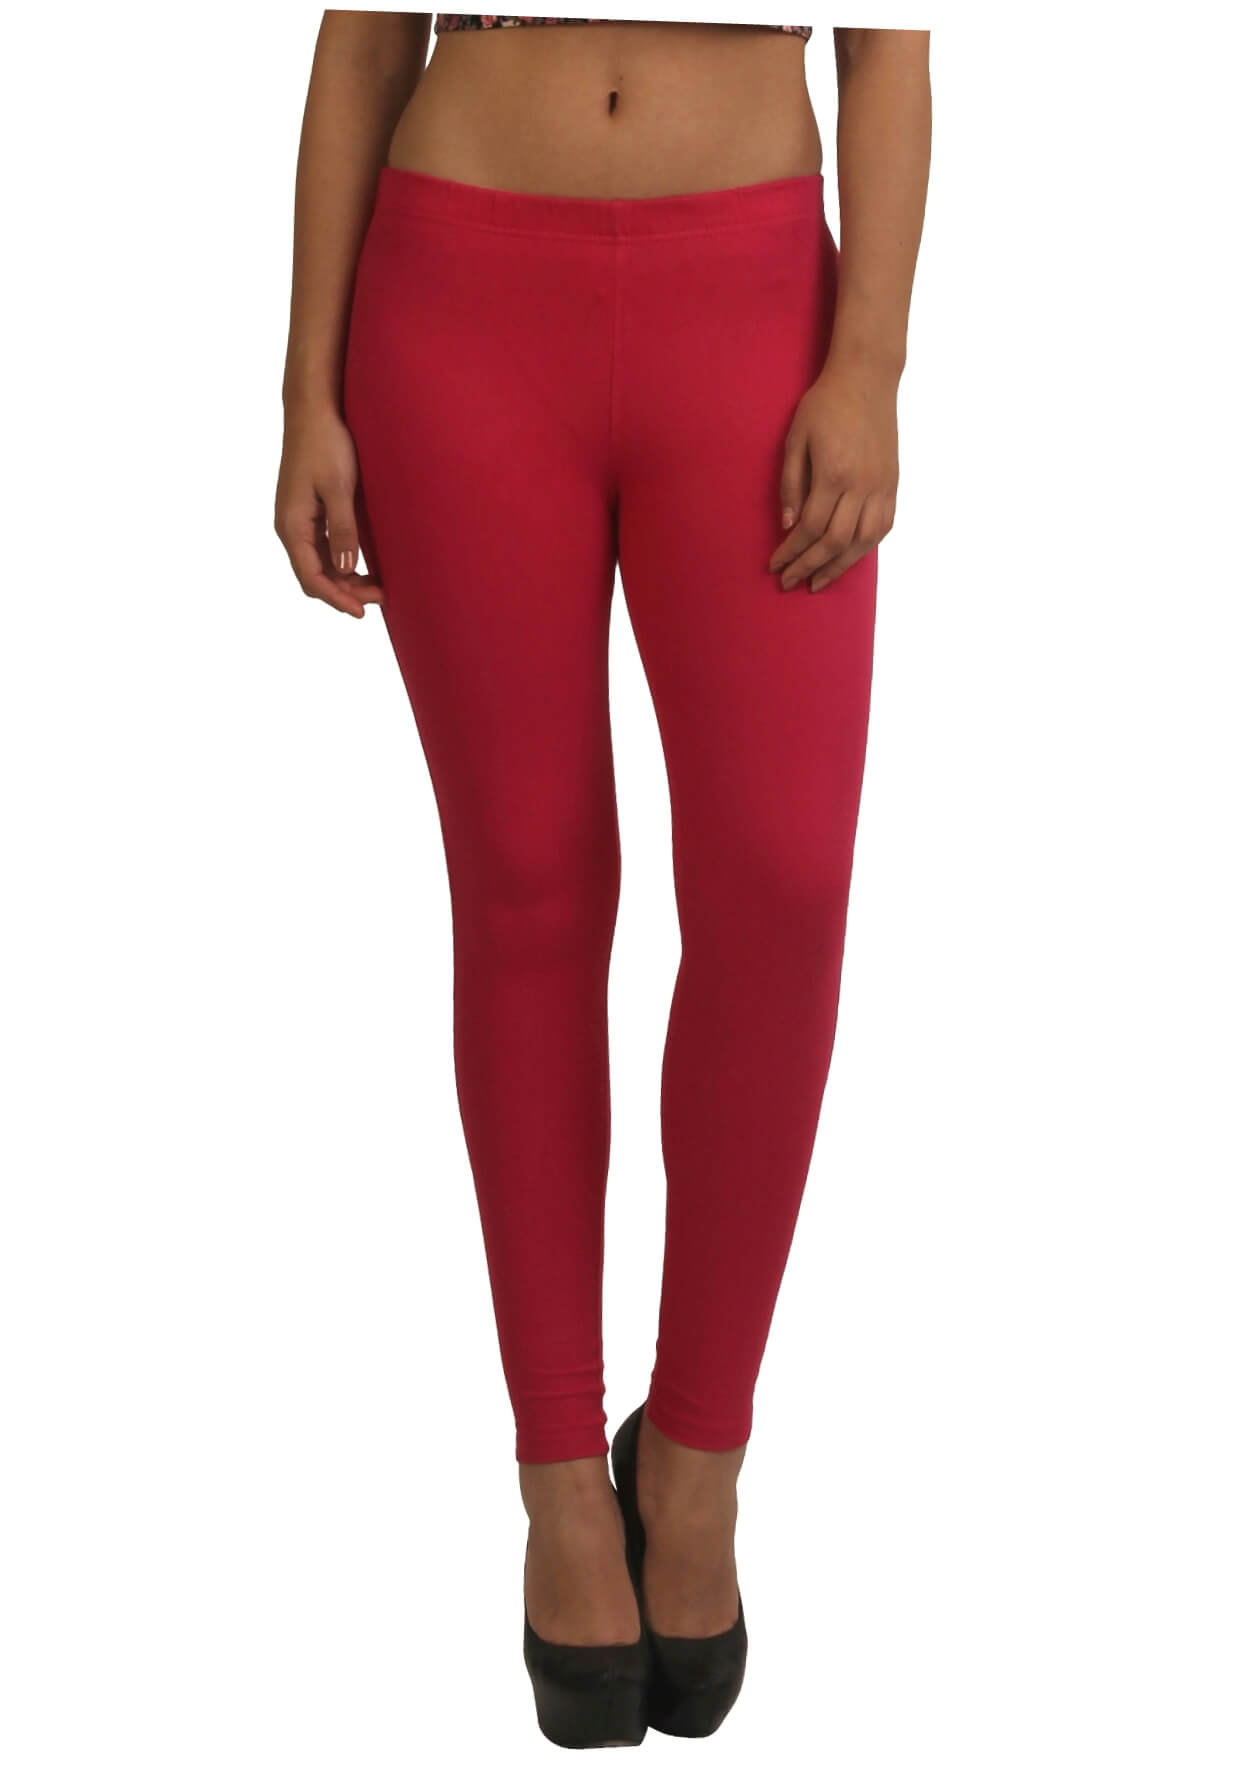 Frenchtrendz  Buy Frenchtrendz Cotton modal Spandex Swe Pink Jeggings  Online